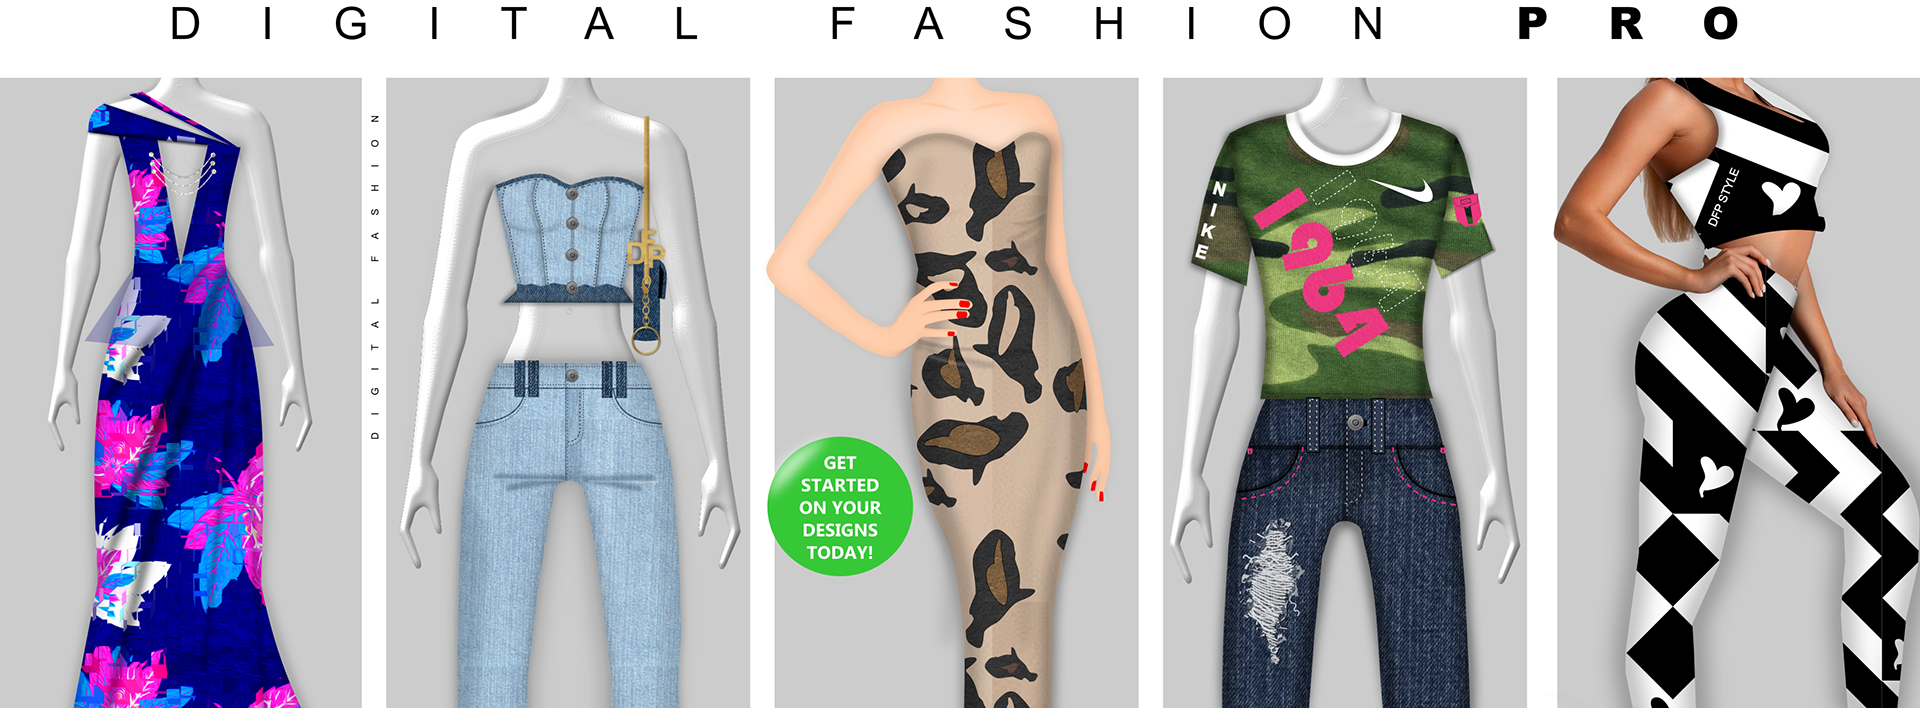 Digital Fashion Pro - The Tool For Clothing Design 1